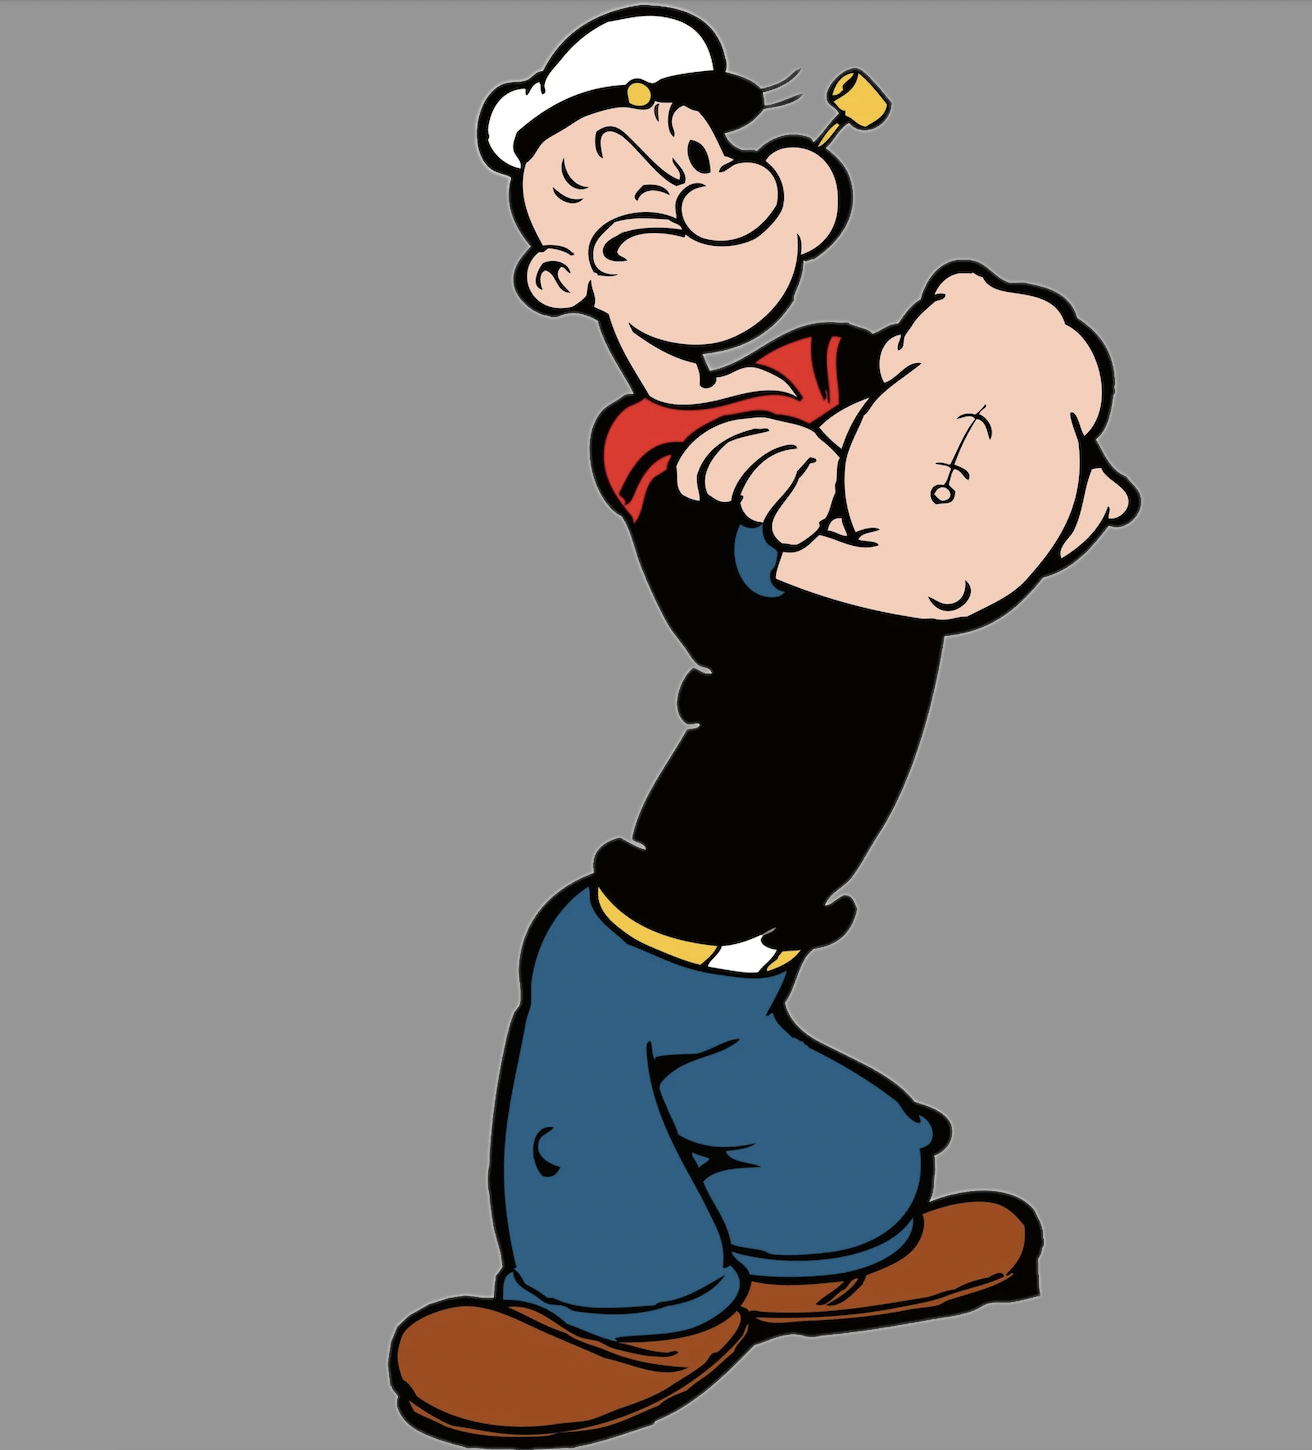 Racist looking animated characters - popeye